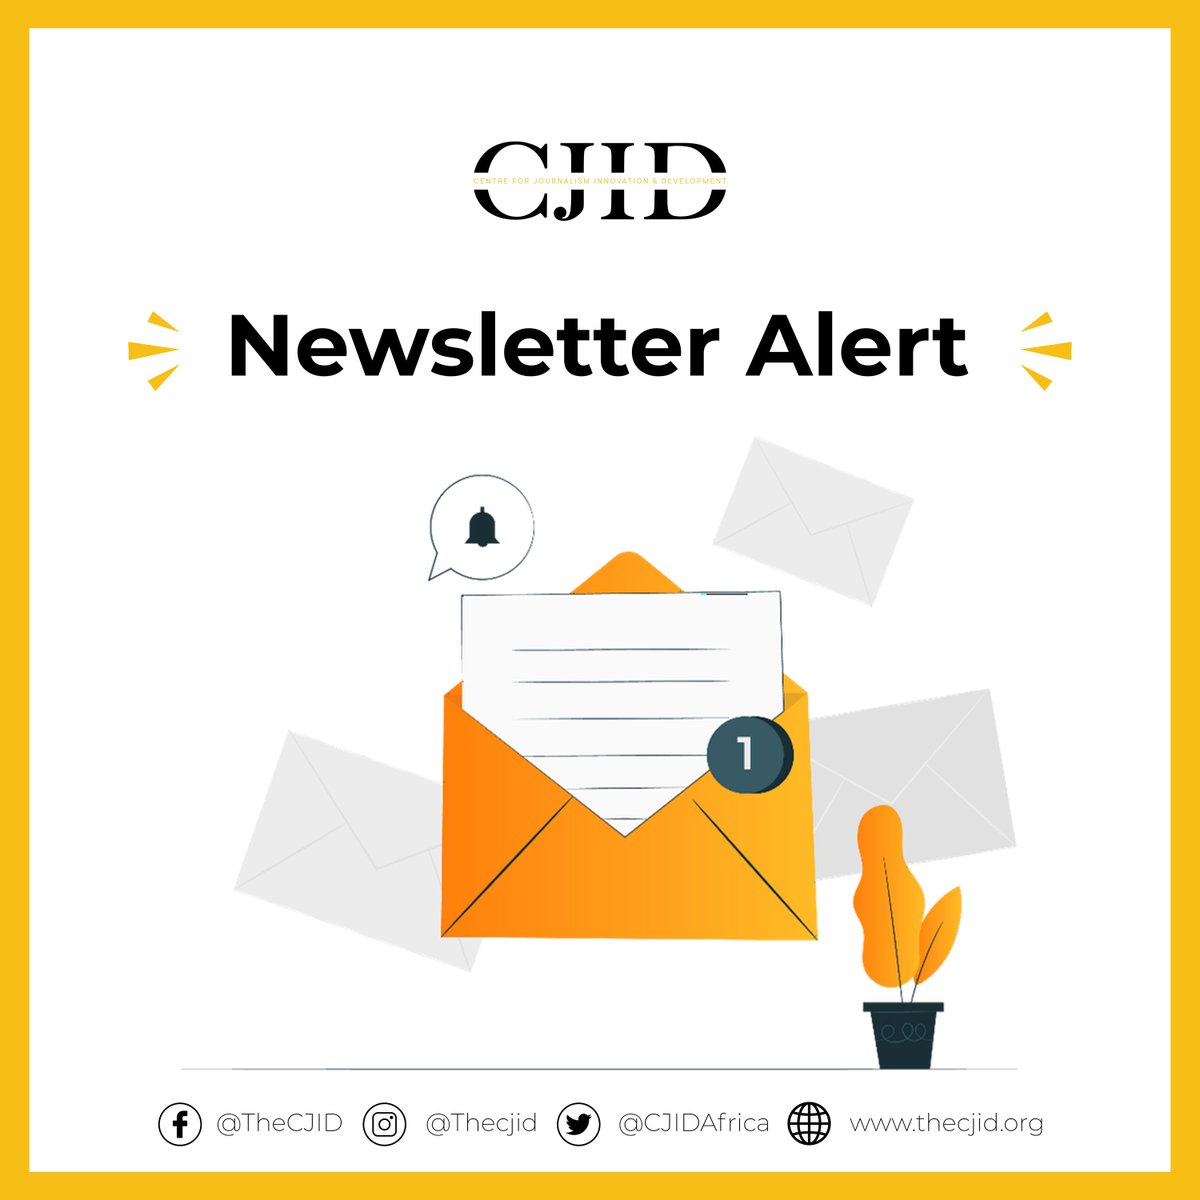 🚨Newsletter Alert🚨 Our March/Q1 newsletter is out! Head on now and check out what we’ve been up to, as well as other information that might interest you. Click the link to read: tr.ee/3lIl9XW0Qx #CJIDNewsletter